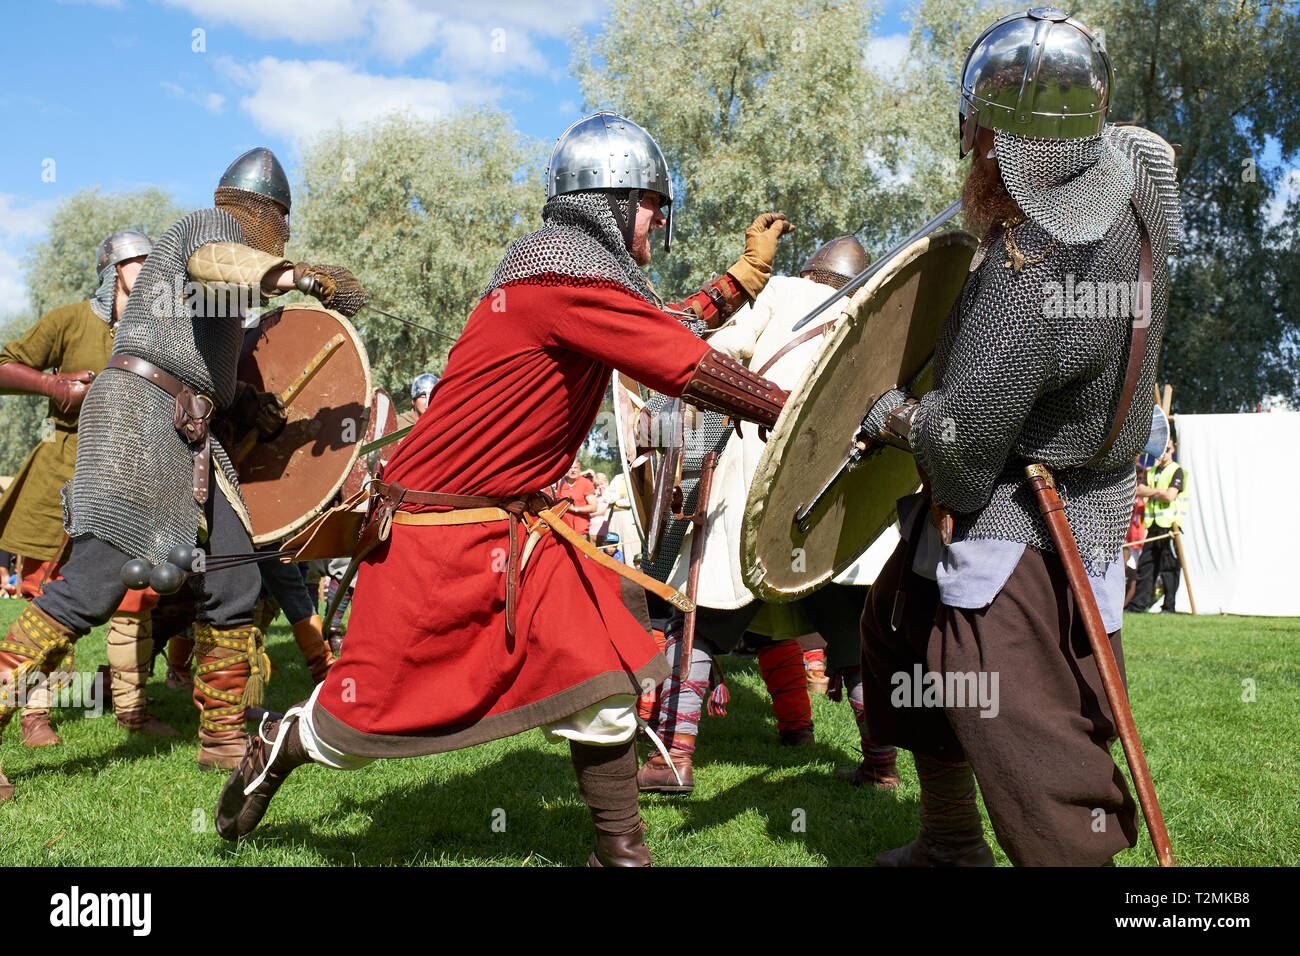 Hämeenlinna, Finland -  August 17, 2014: Vikings fighting with swords and shields at the medieval festival on a sunny summer day. Stock Photo